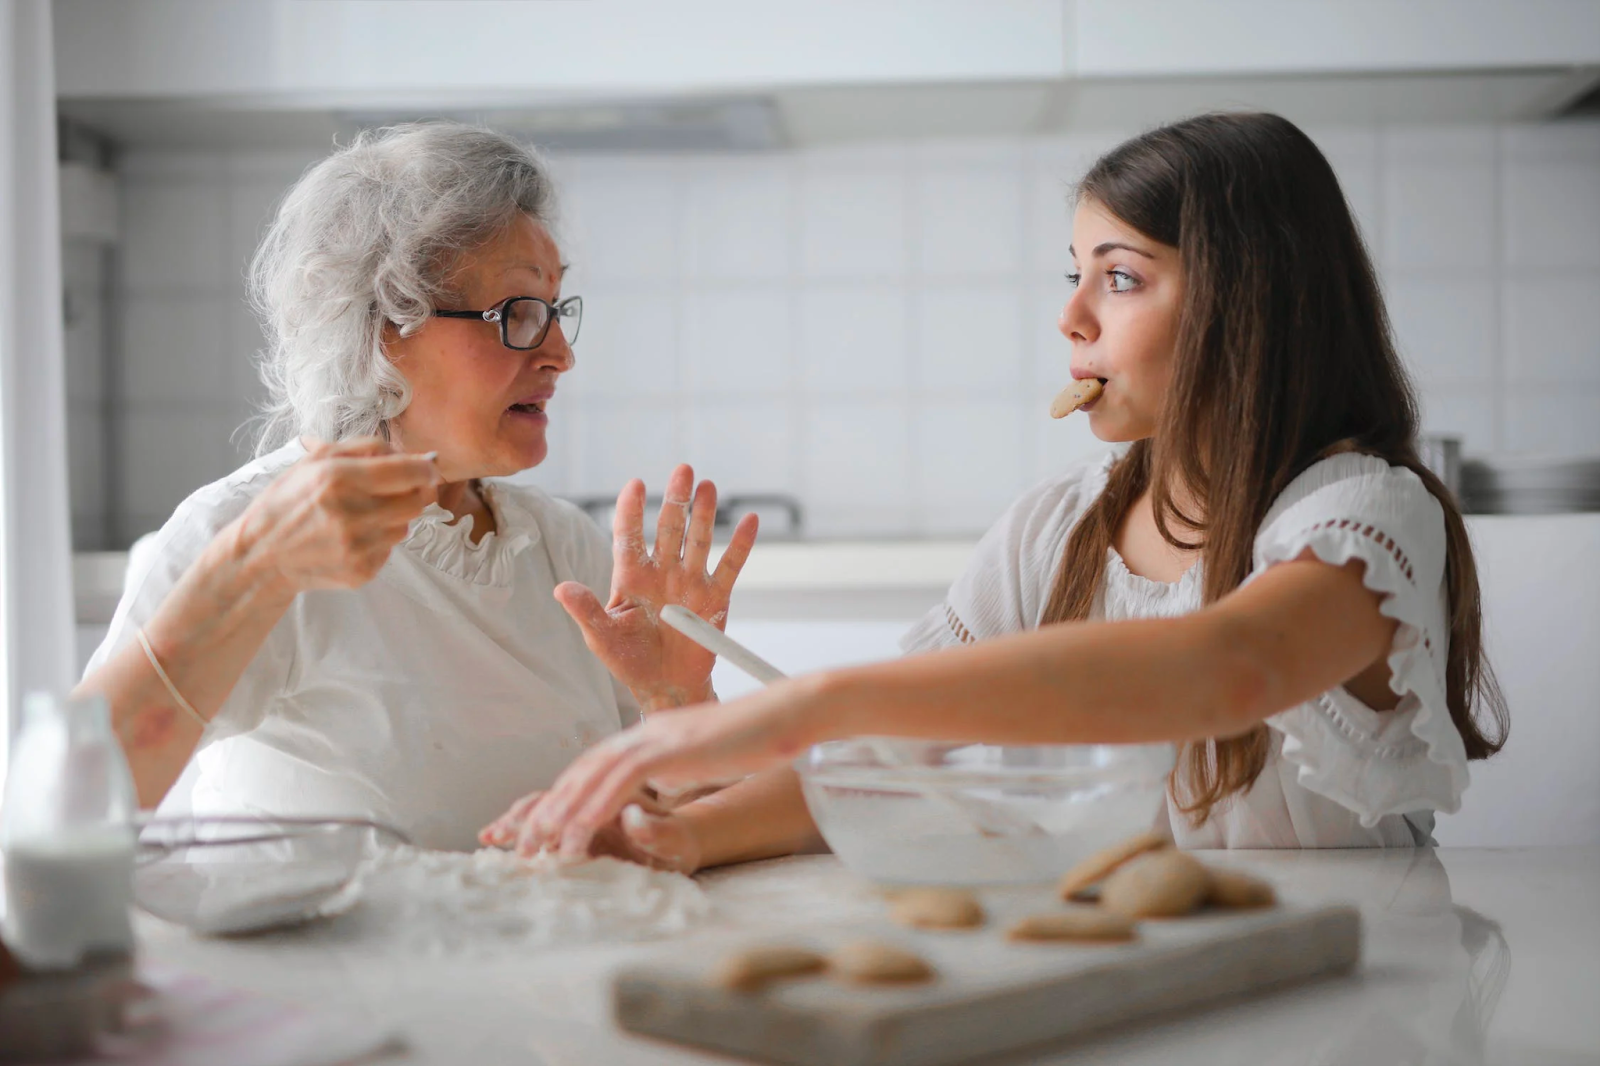 A grandmother teaching her granddaughter to bake. The granddaughter has a cookie in her mouth